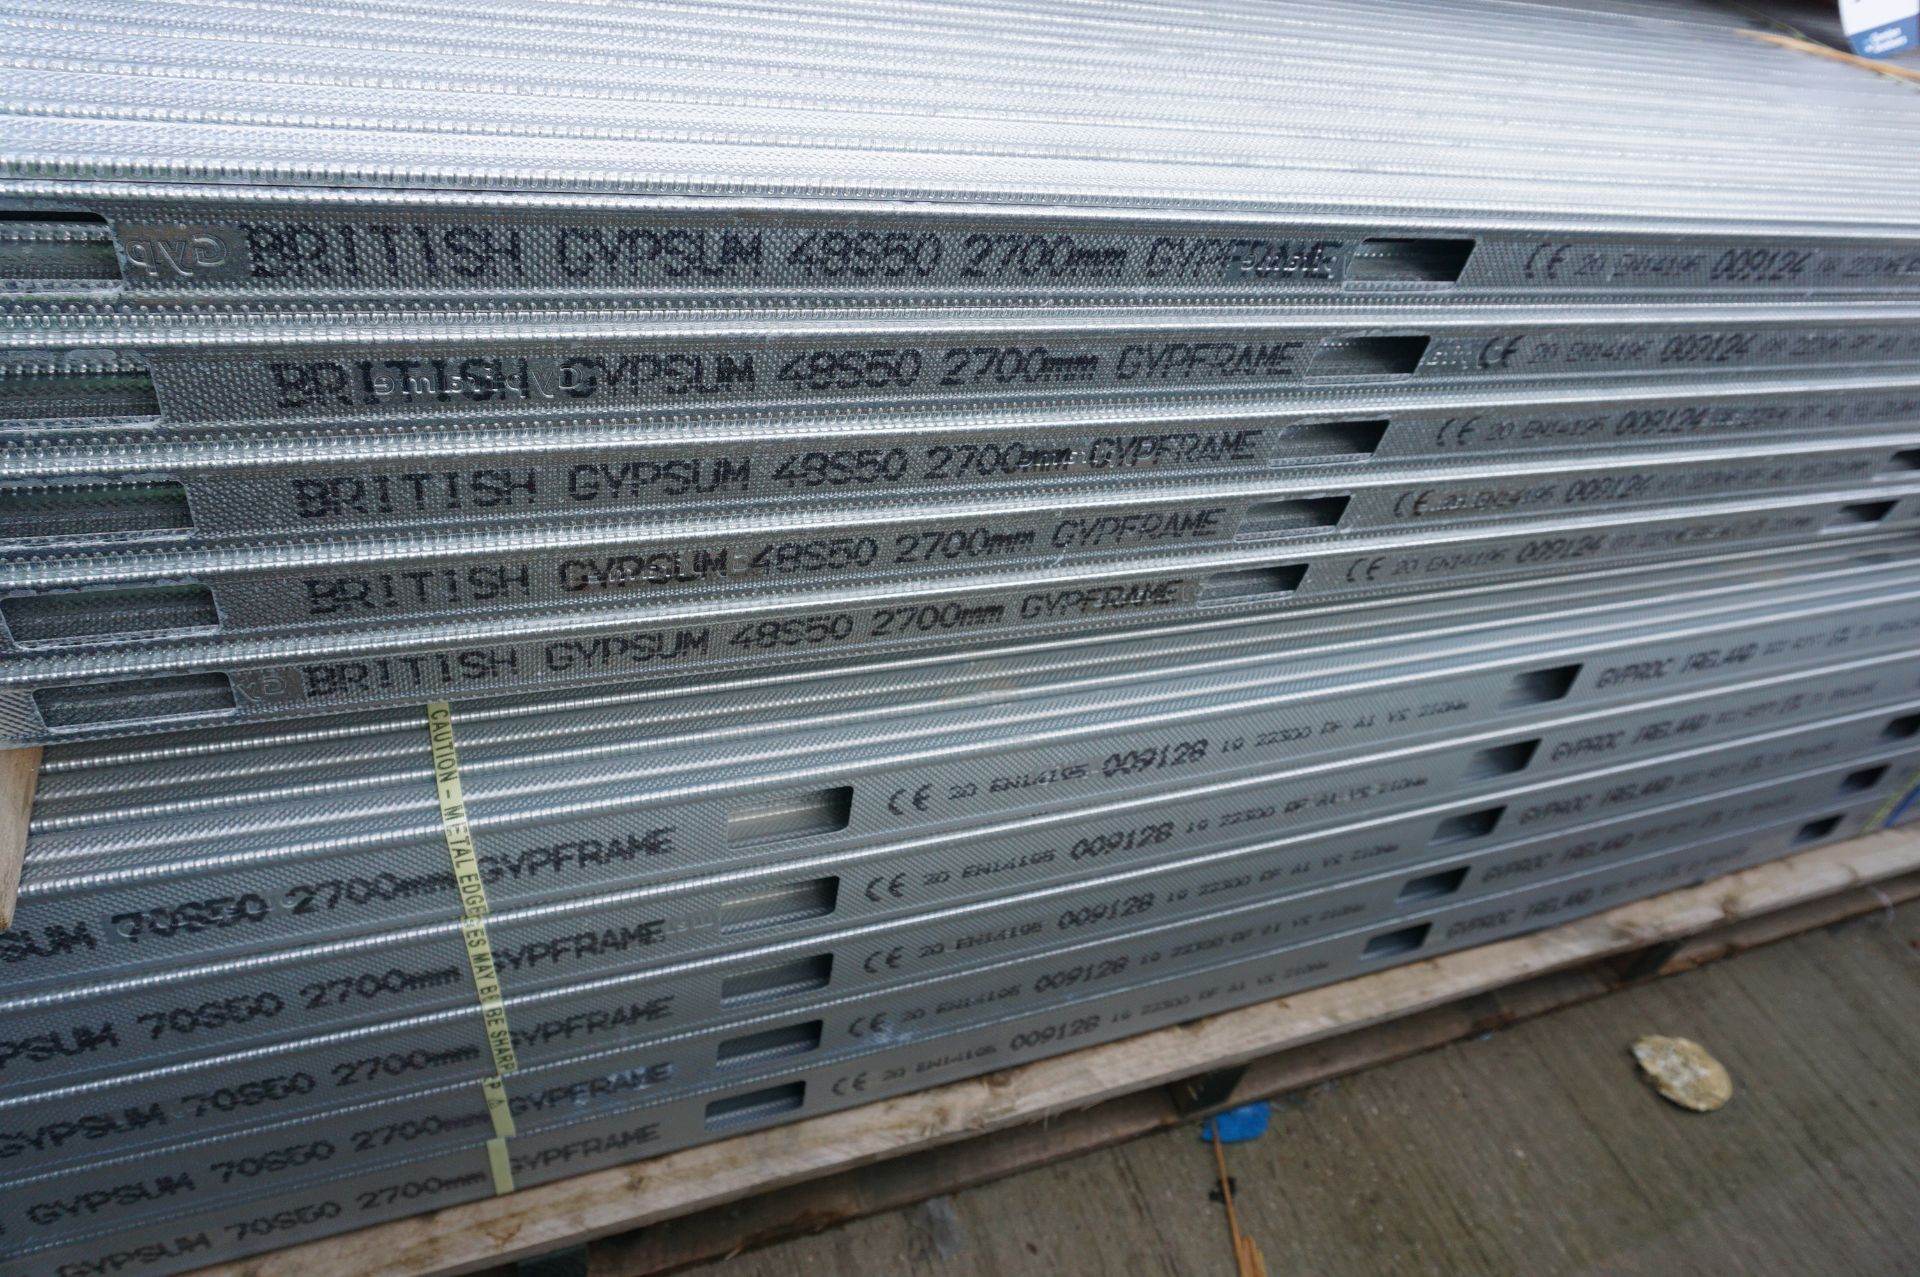 Large quantity of British Gypsum plasterboard components to include: 250x (no.) 48S50 x 2700mm and - Image 7 of 8